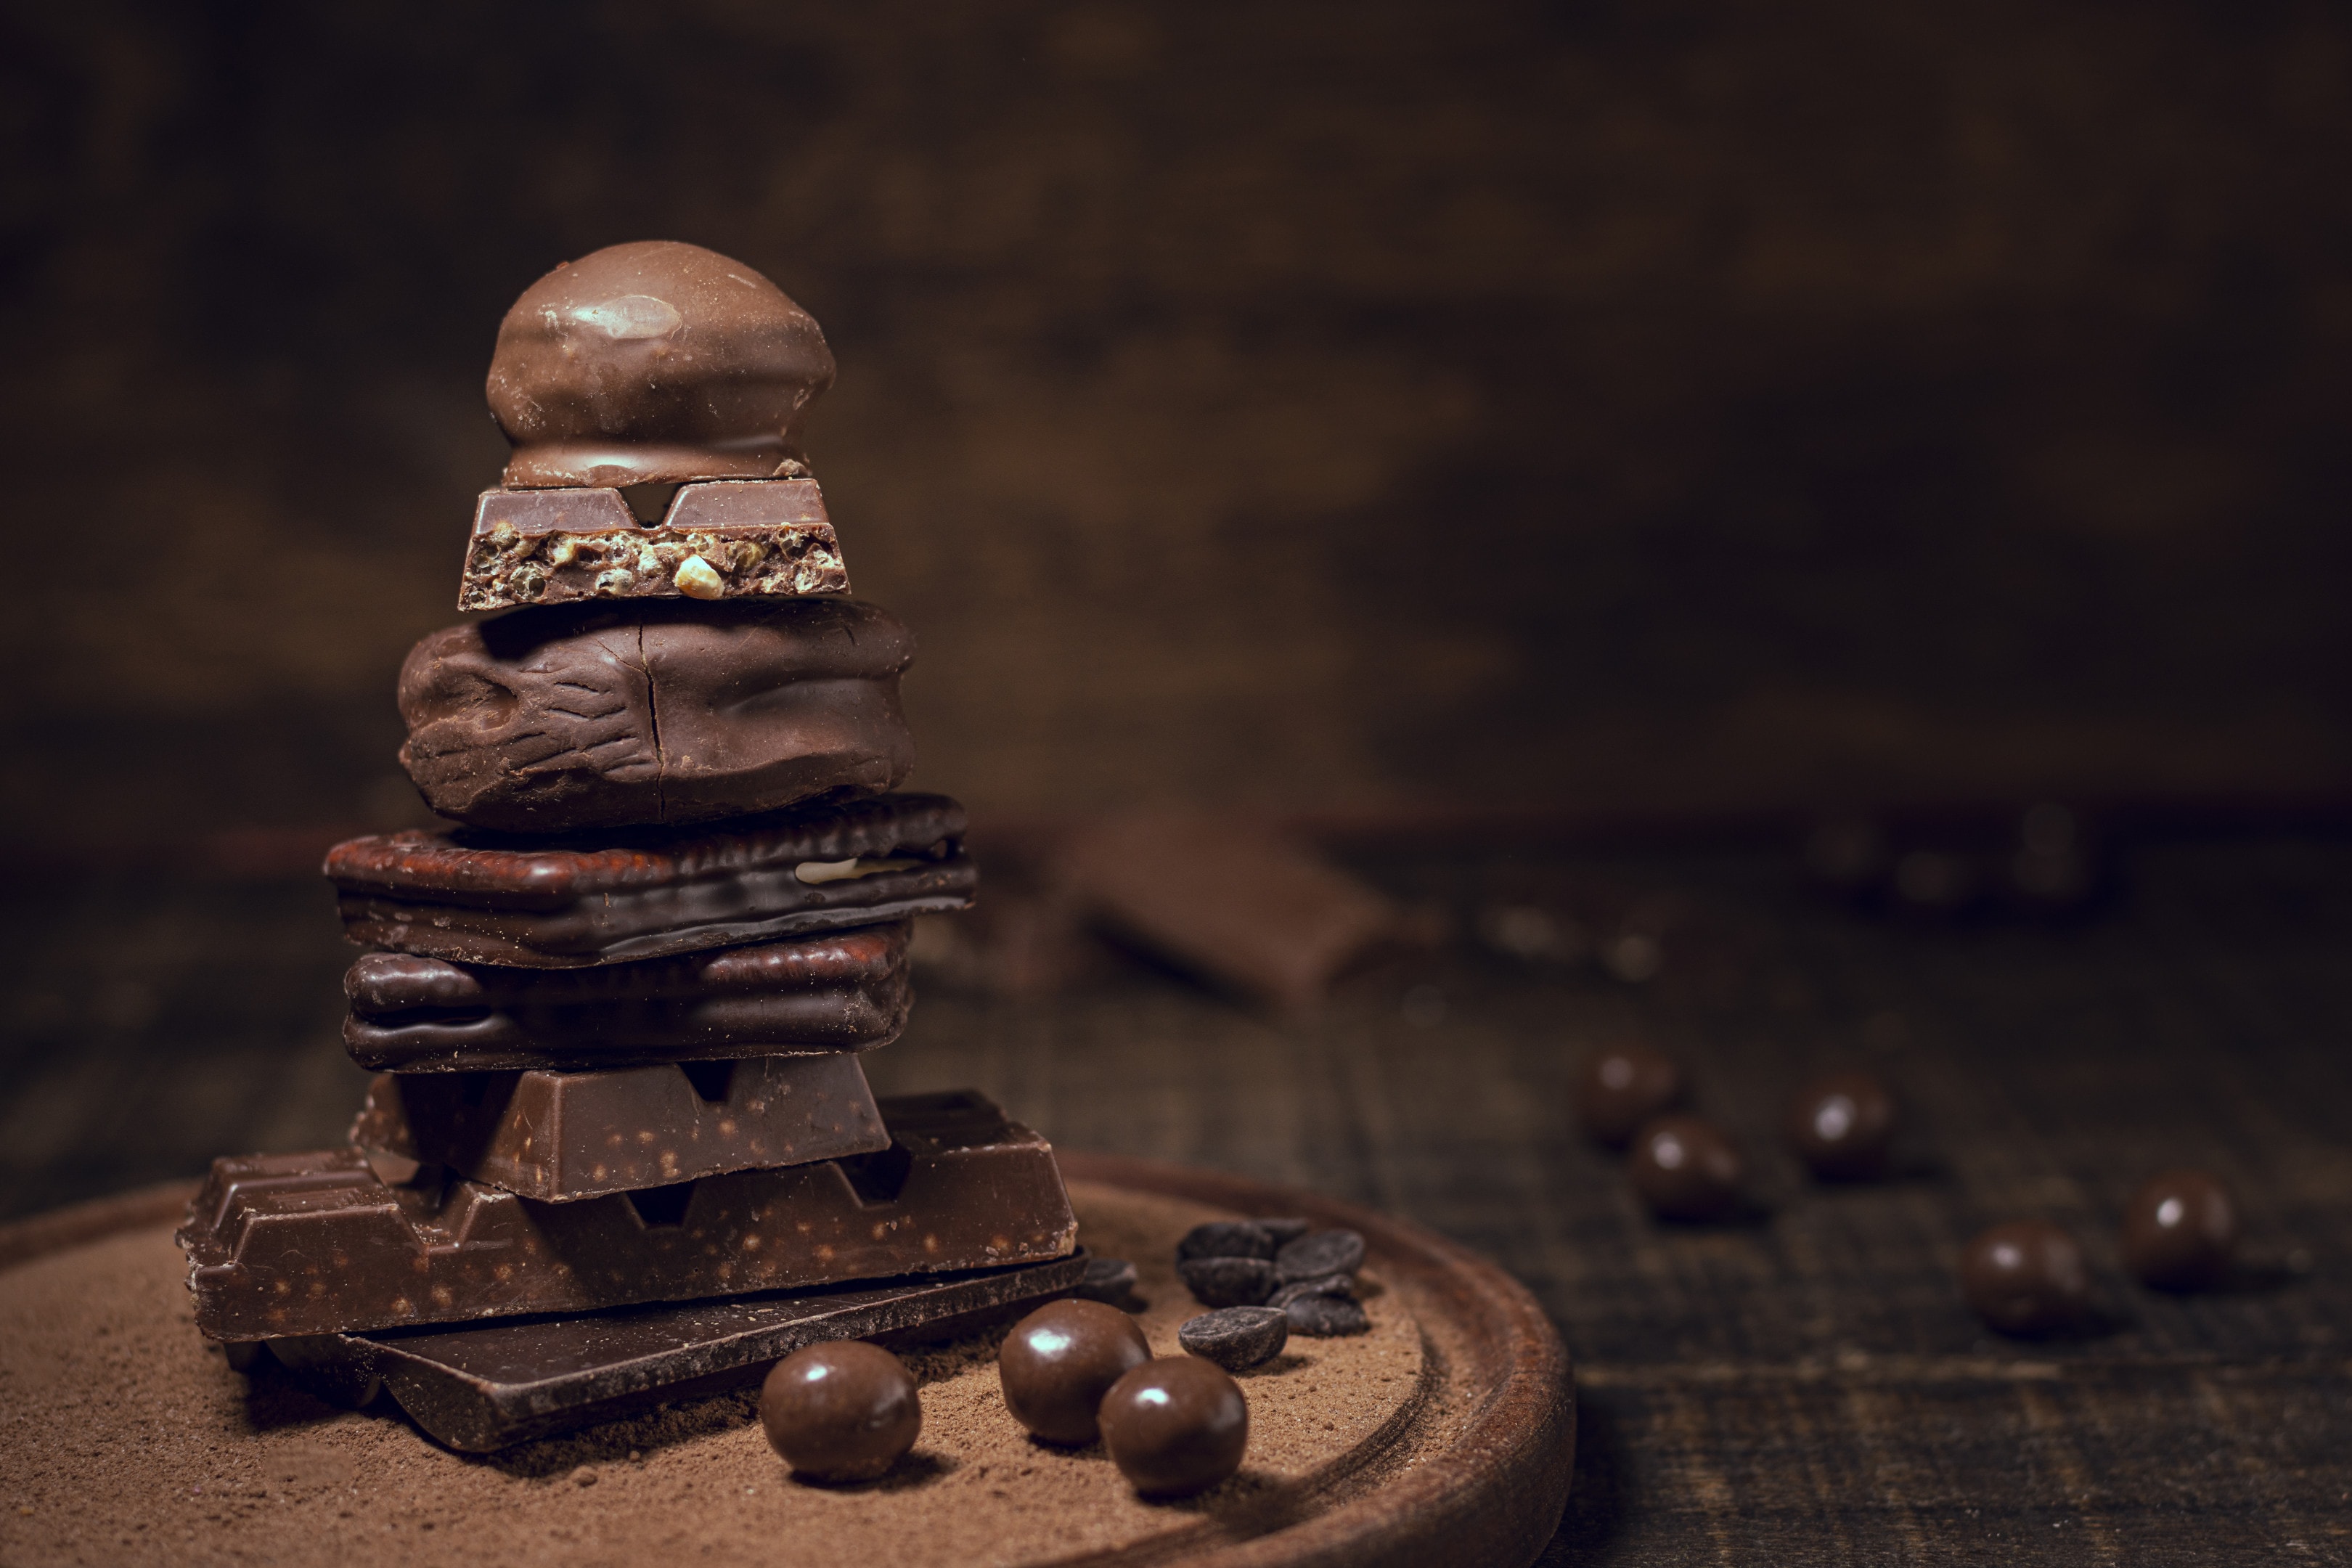 Chocolate pyramid on wooden board